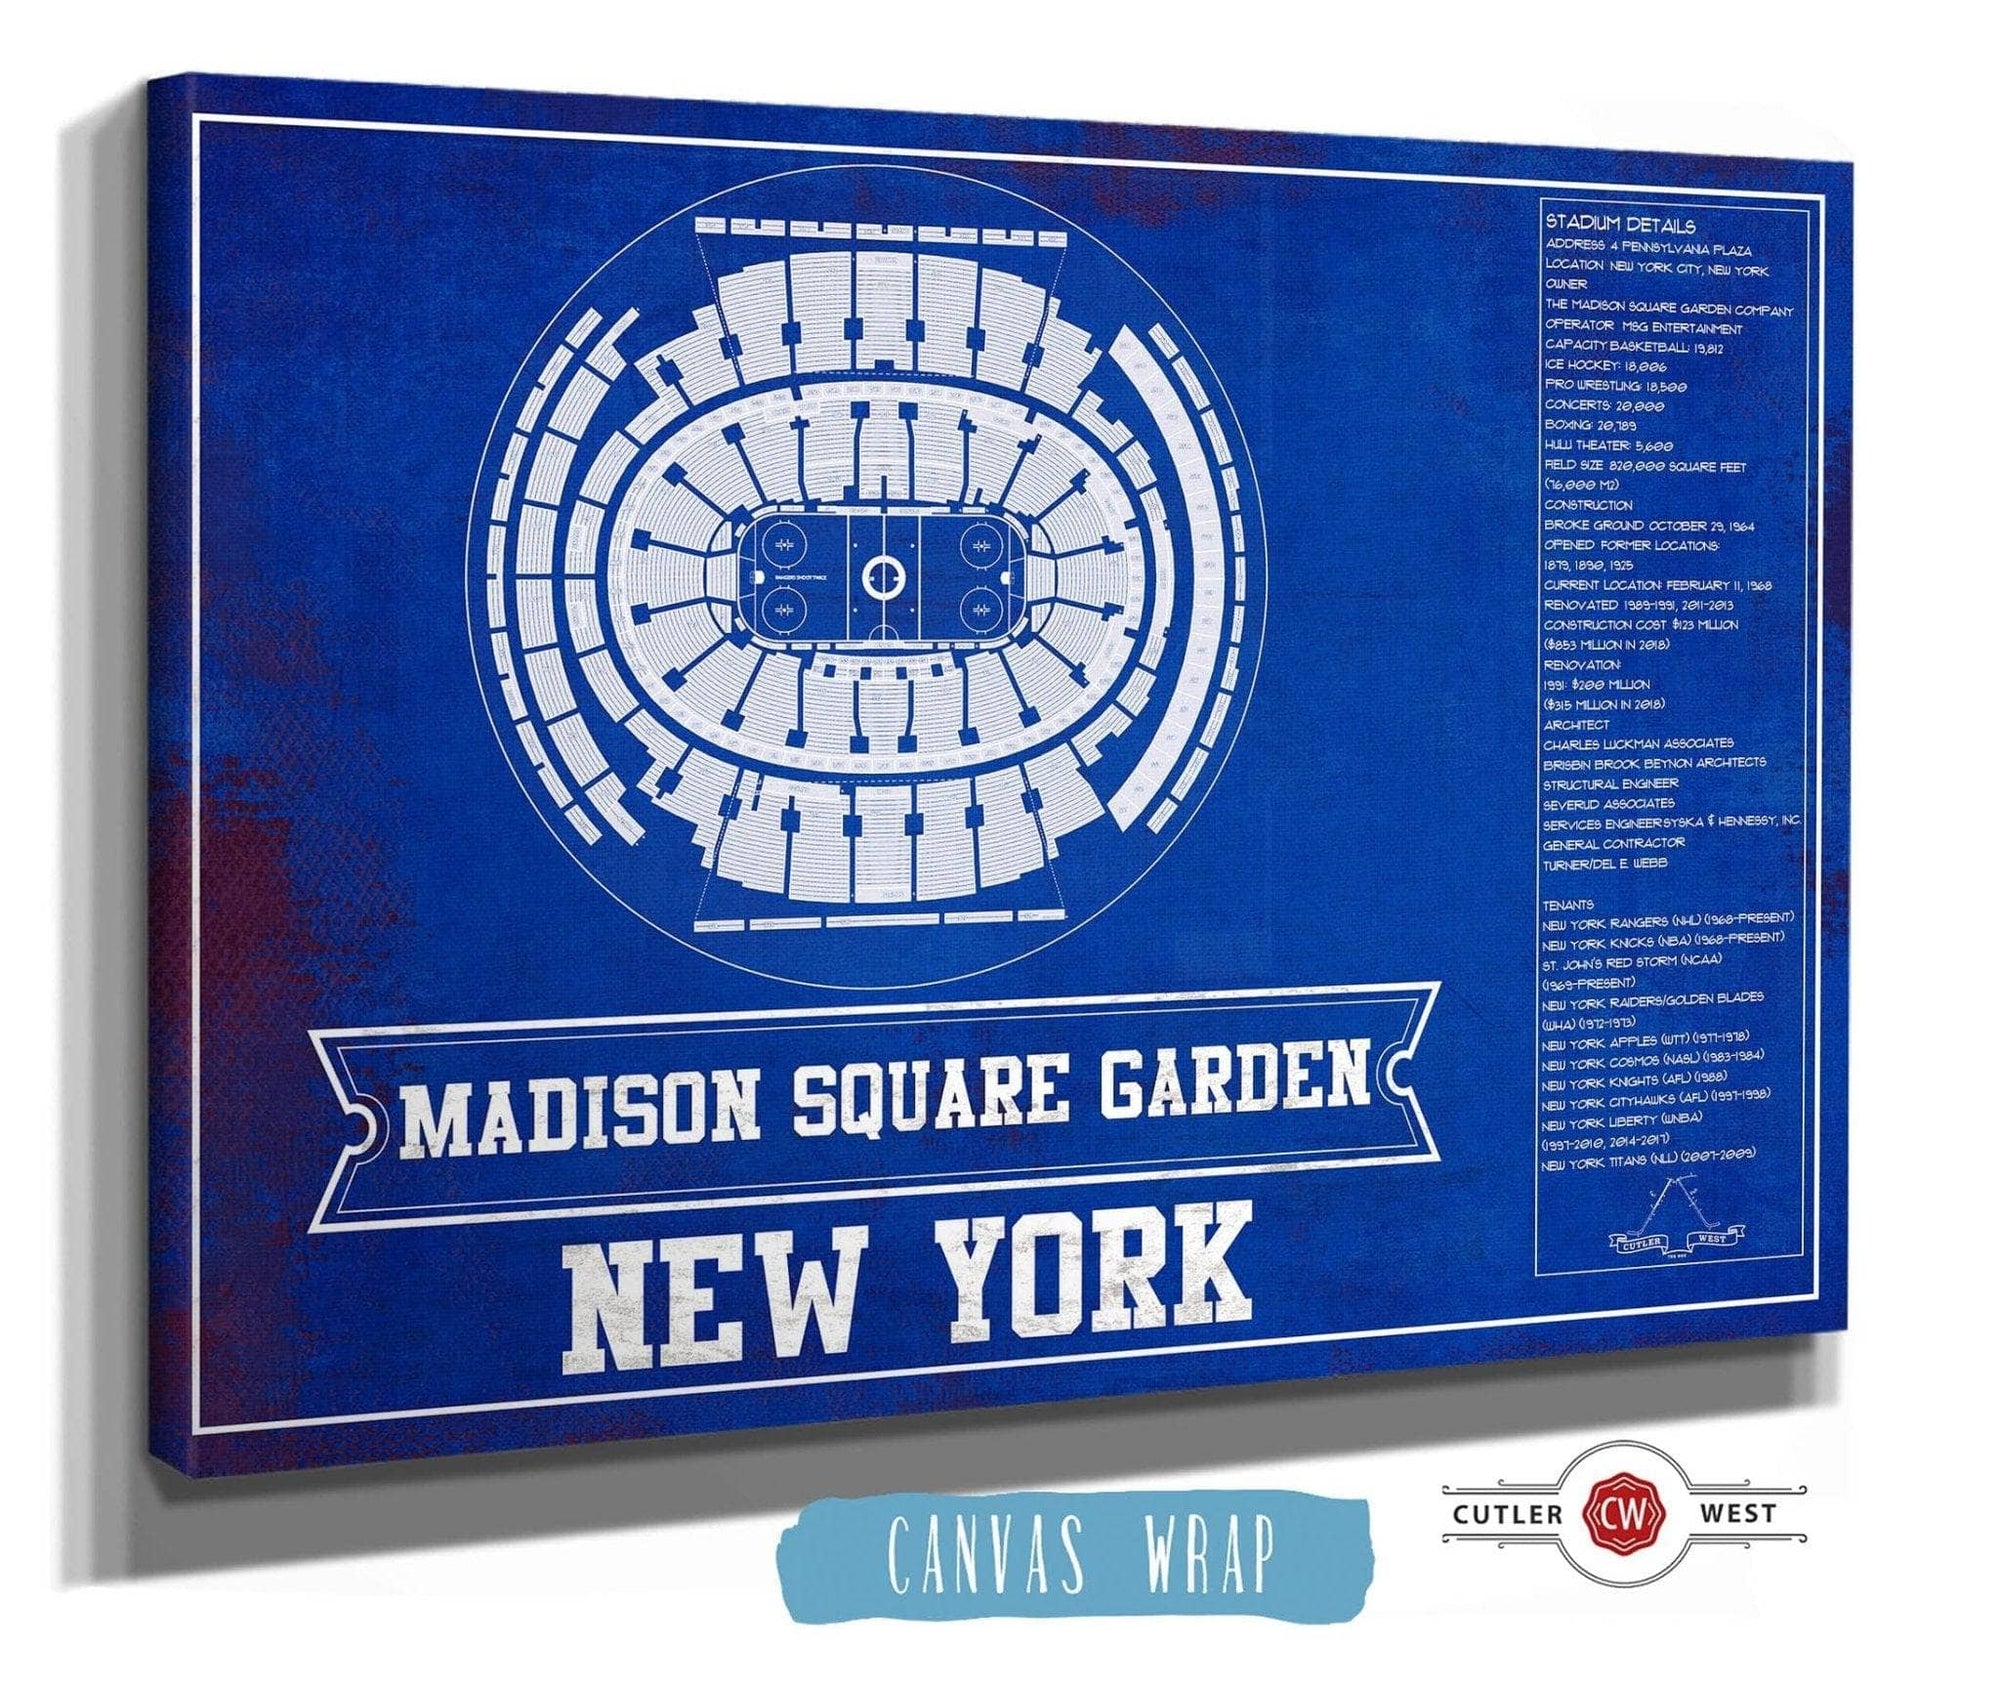 Cutler West 14" x 11" / Stretched Canvas Wrap New York Rangers Team Colors - Madison Square Garden Vintage Hockey Blueprint NHL Print 933350204_80593